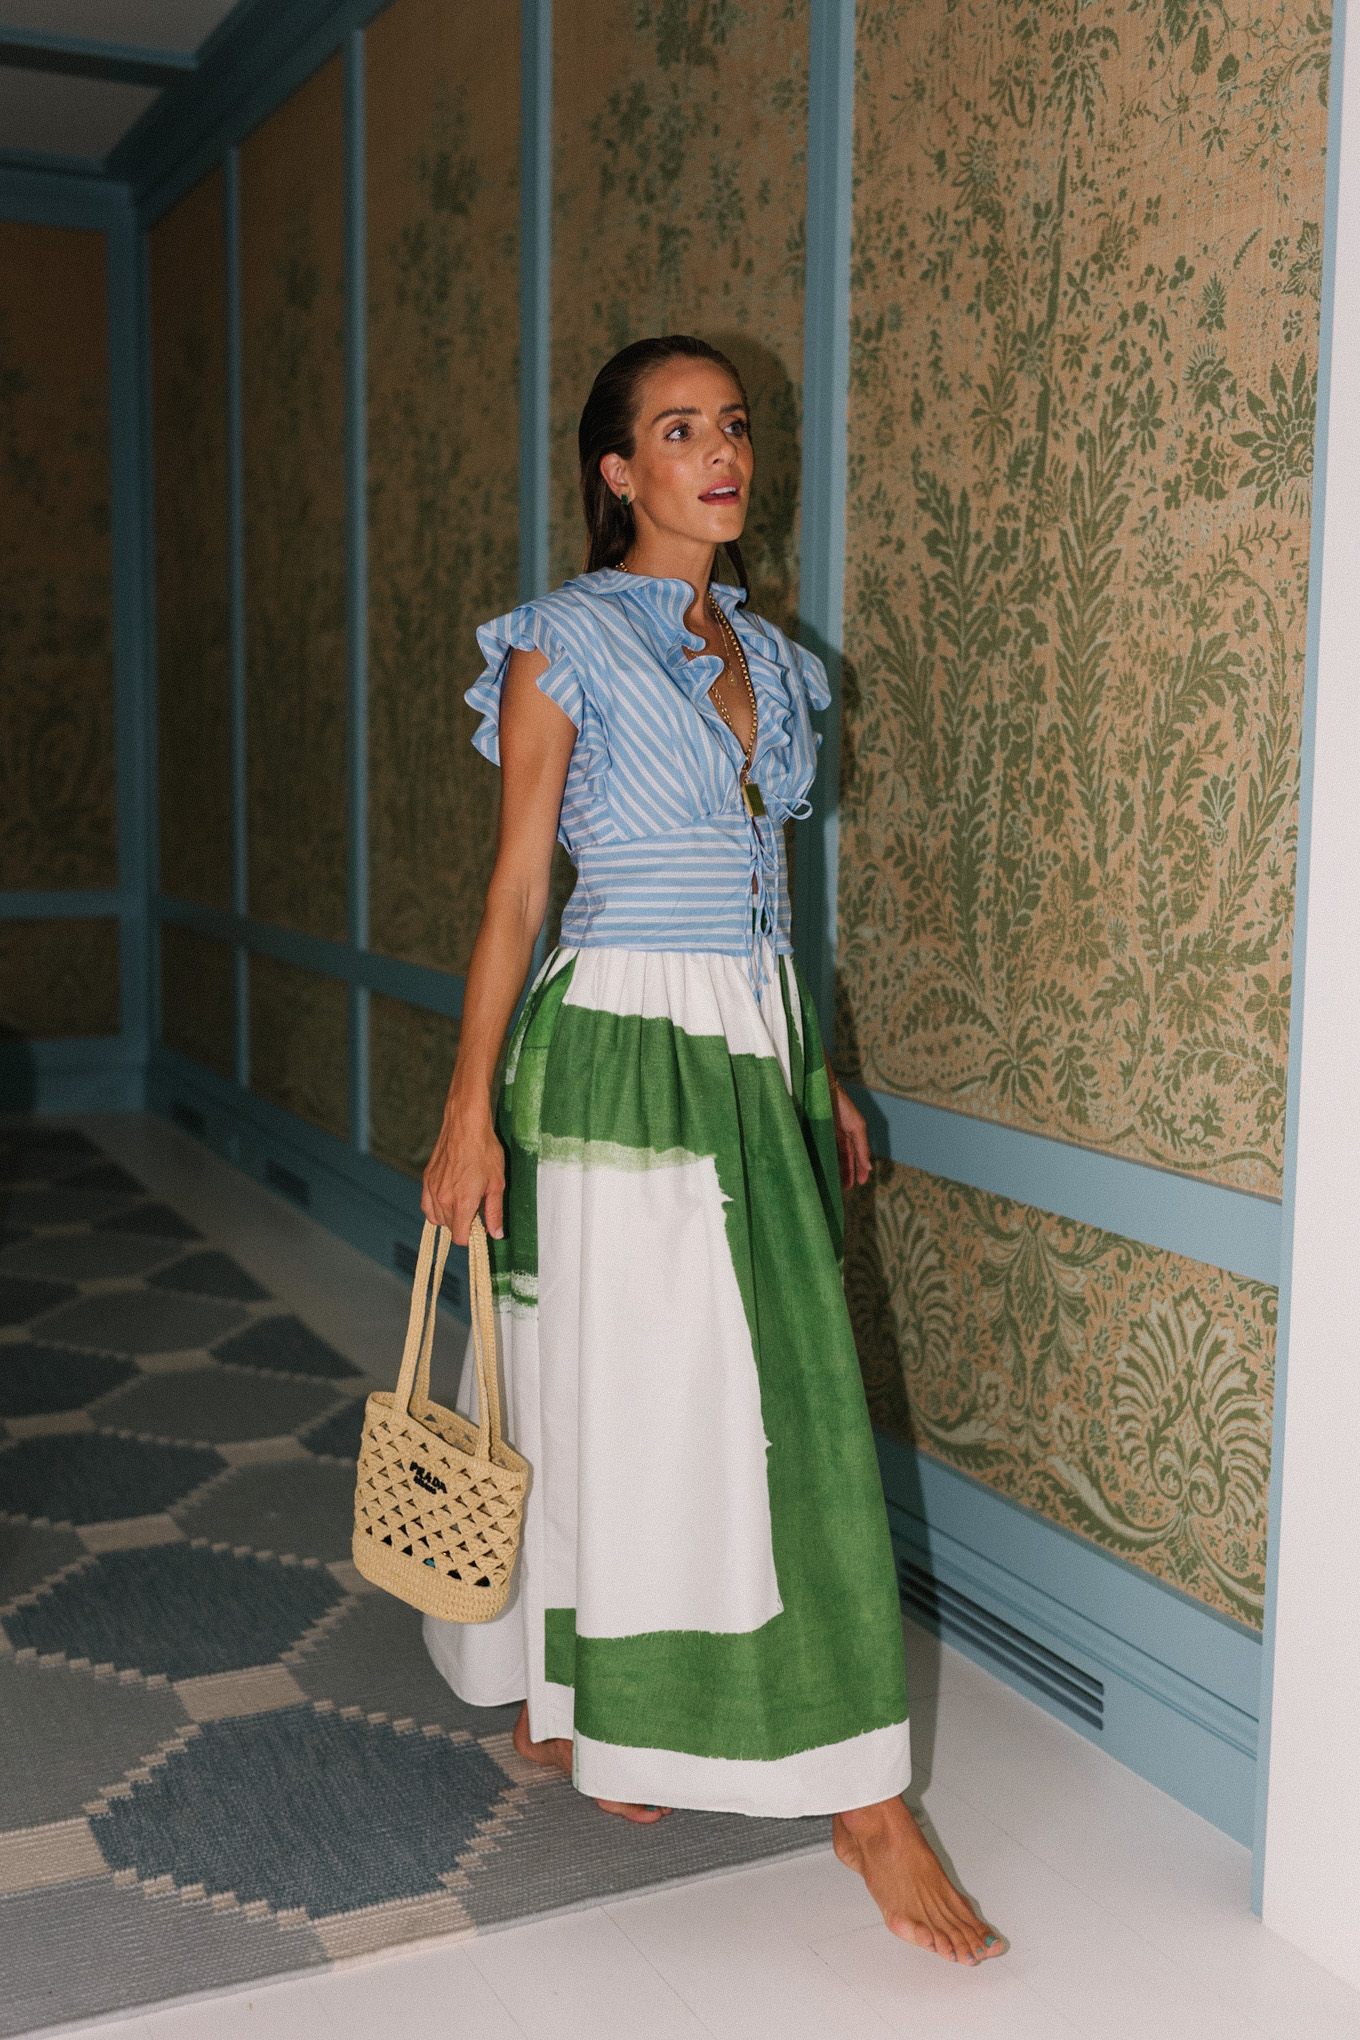 Blue and white striped blouse green and white maxi skirt